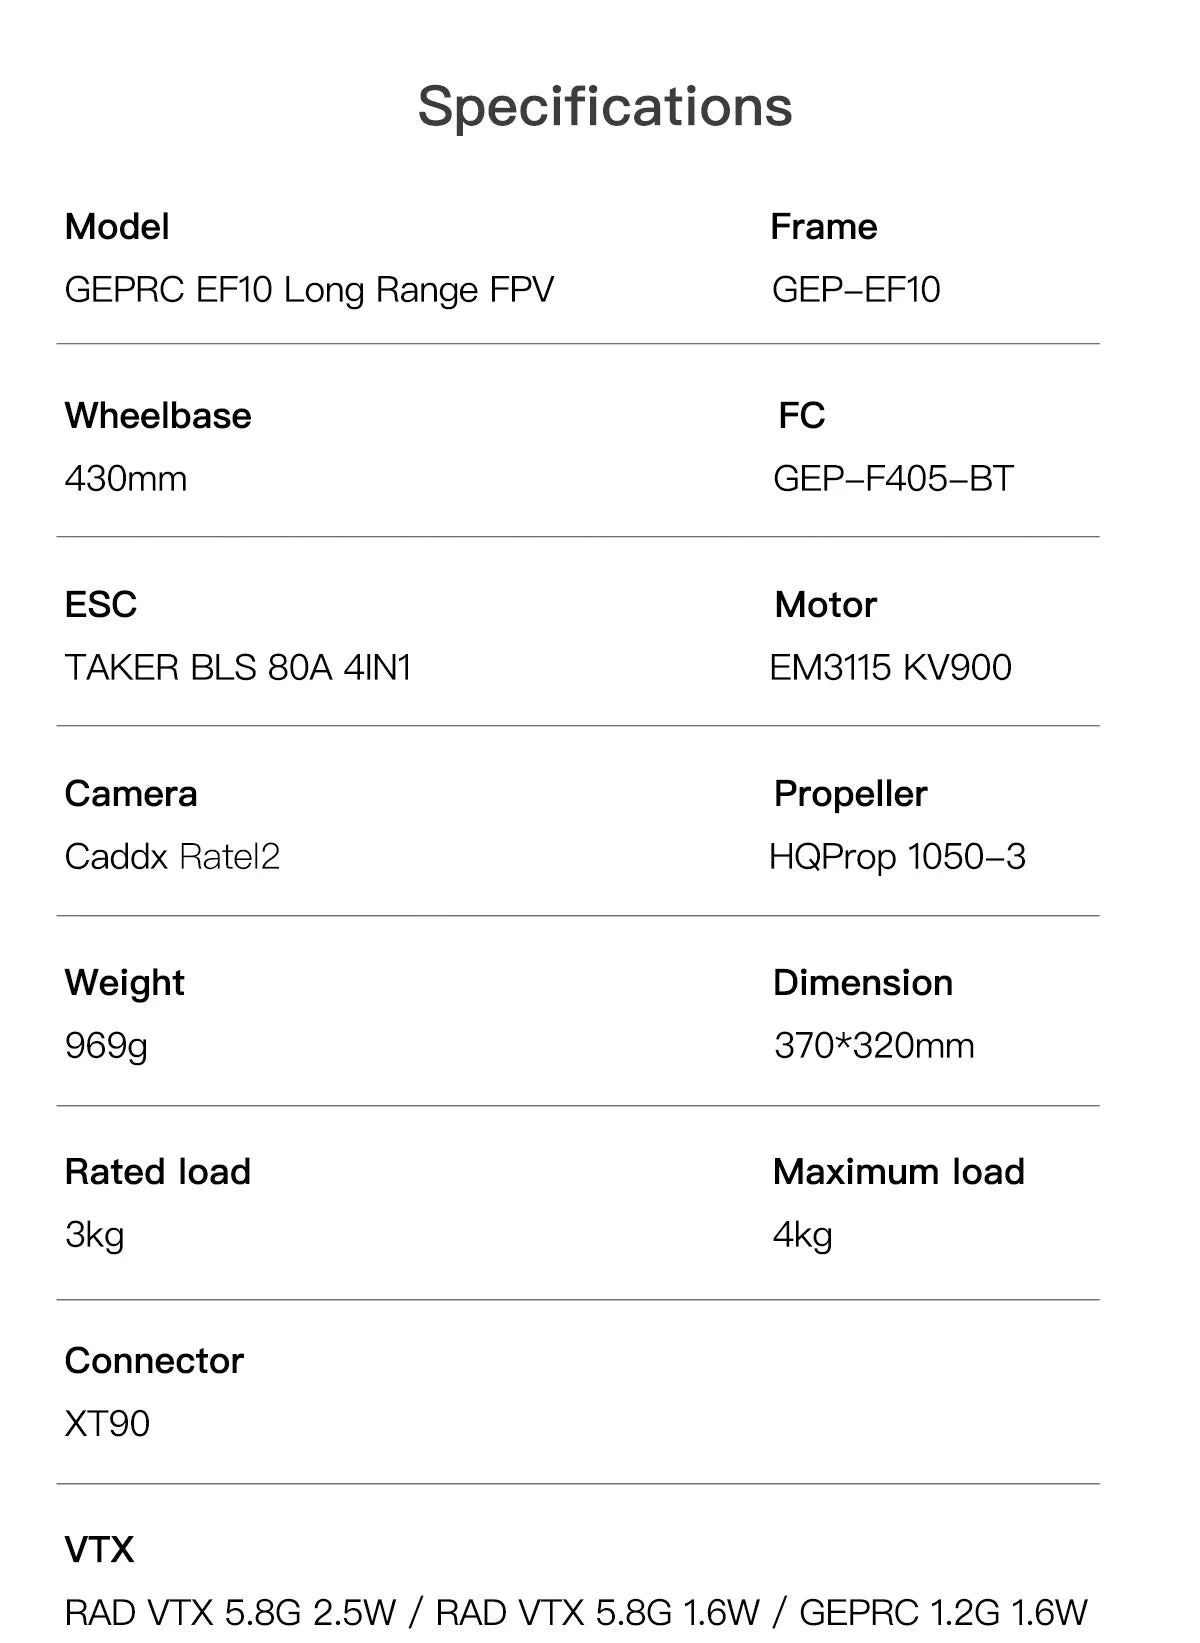 GEPRC EF10 1.2G 2W Long Range 10inch FPV, HQProp 1050-3 Weight Dimension 969g 370*32Omm Rated